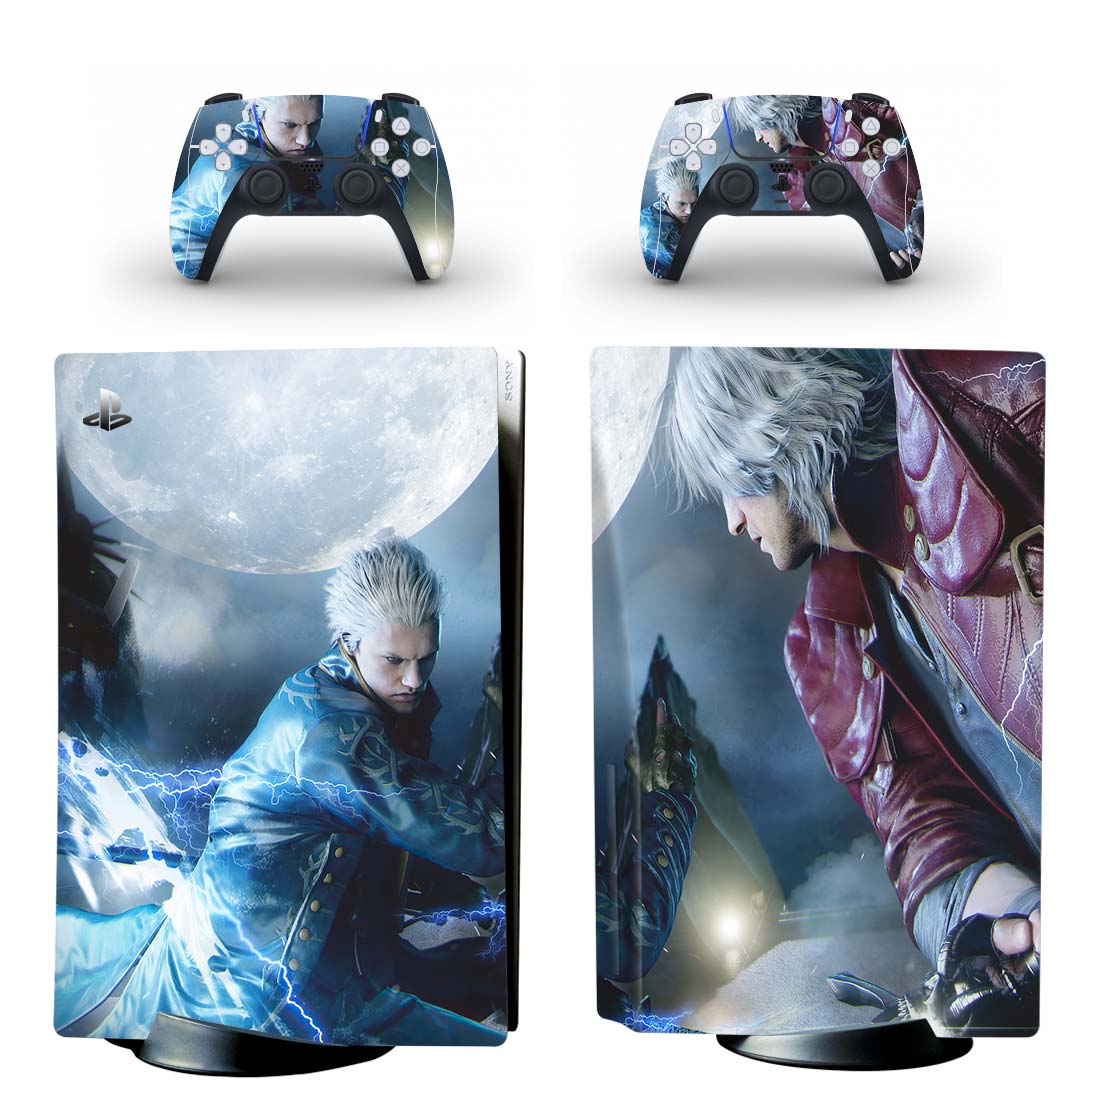 Devil May Cry 5 PS5 Skin Sticker And Controllers